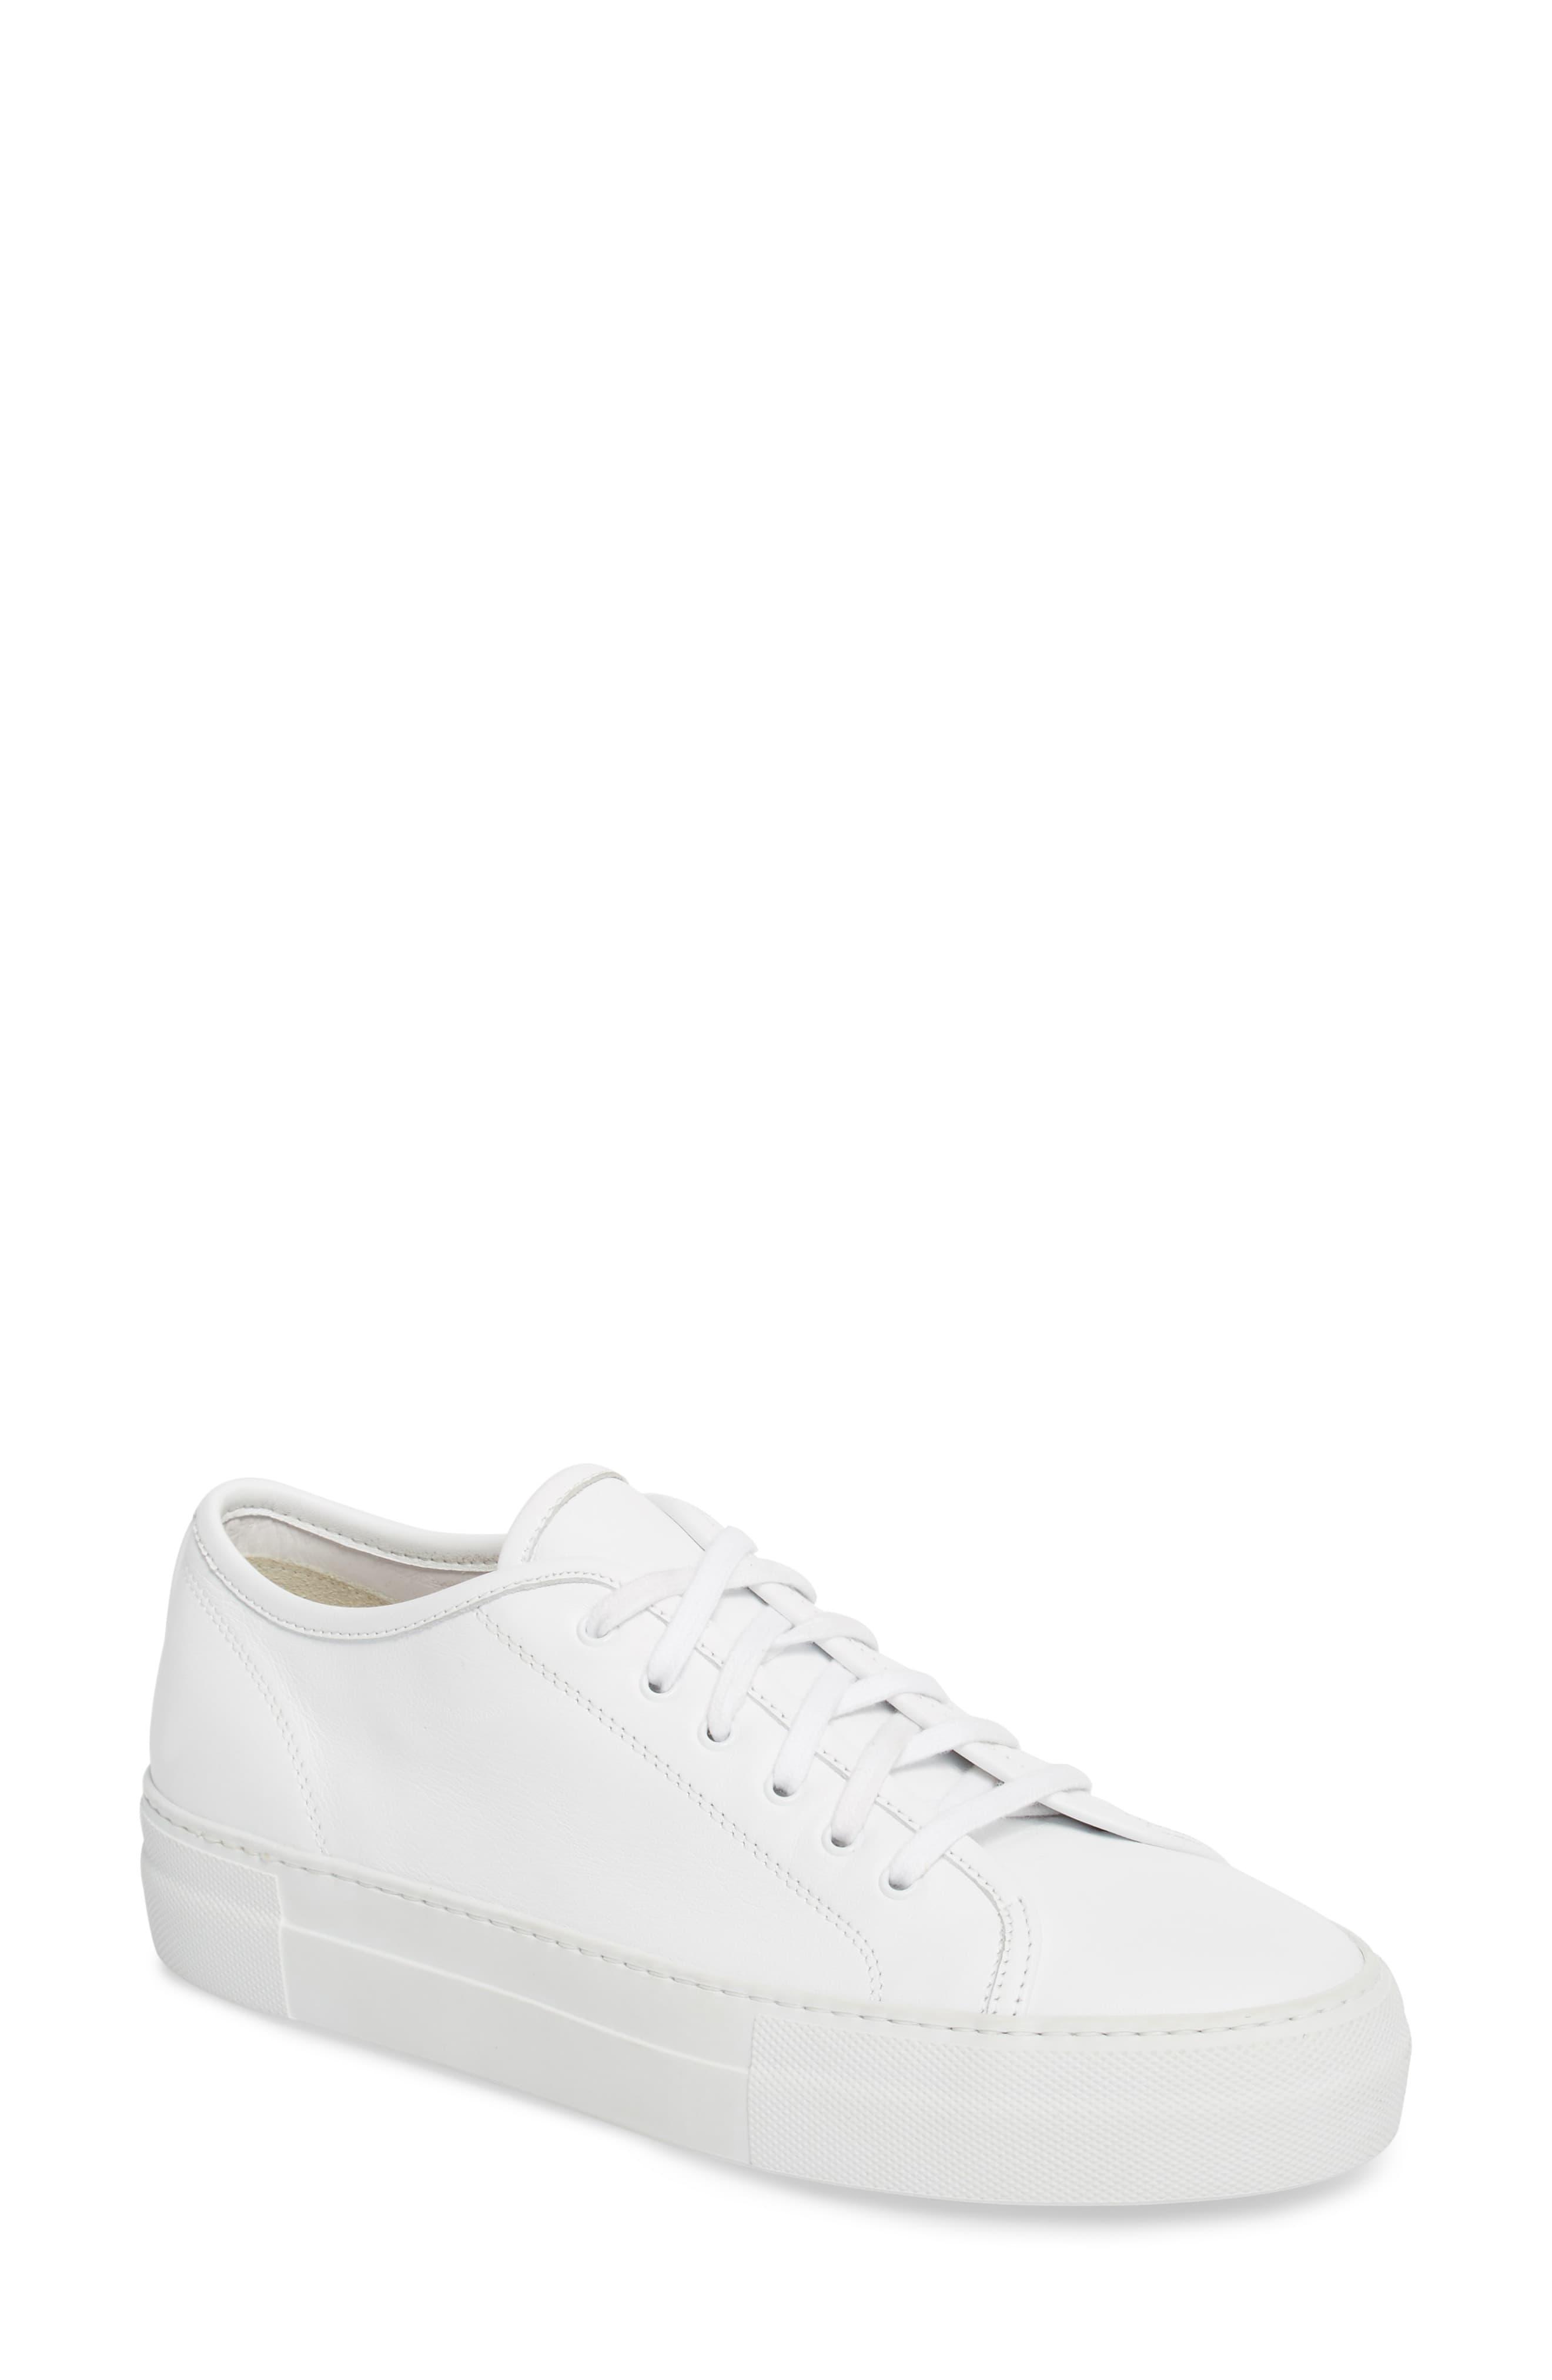 Common Projects Tournament Low Top Sneaker in White - Lyst